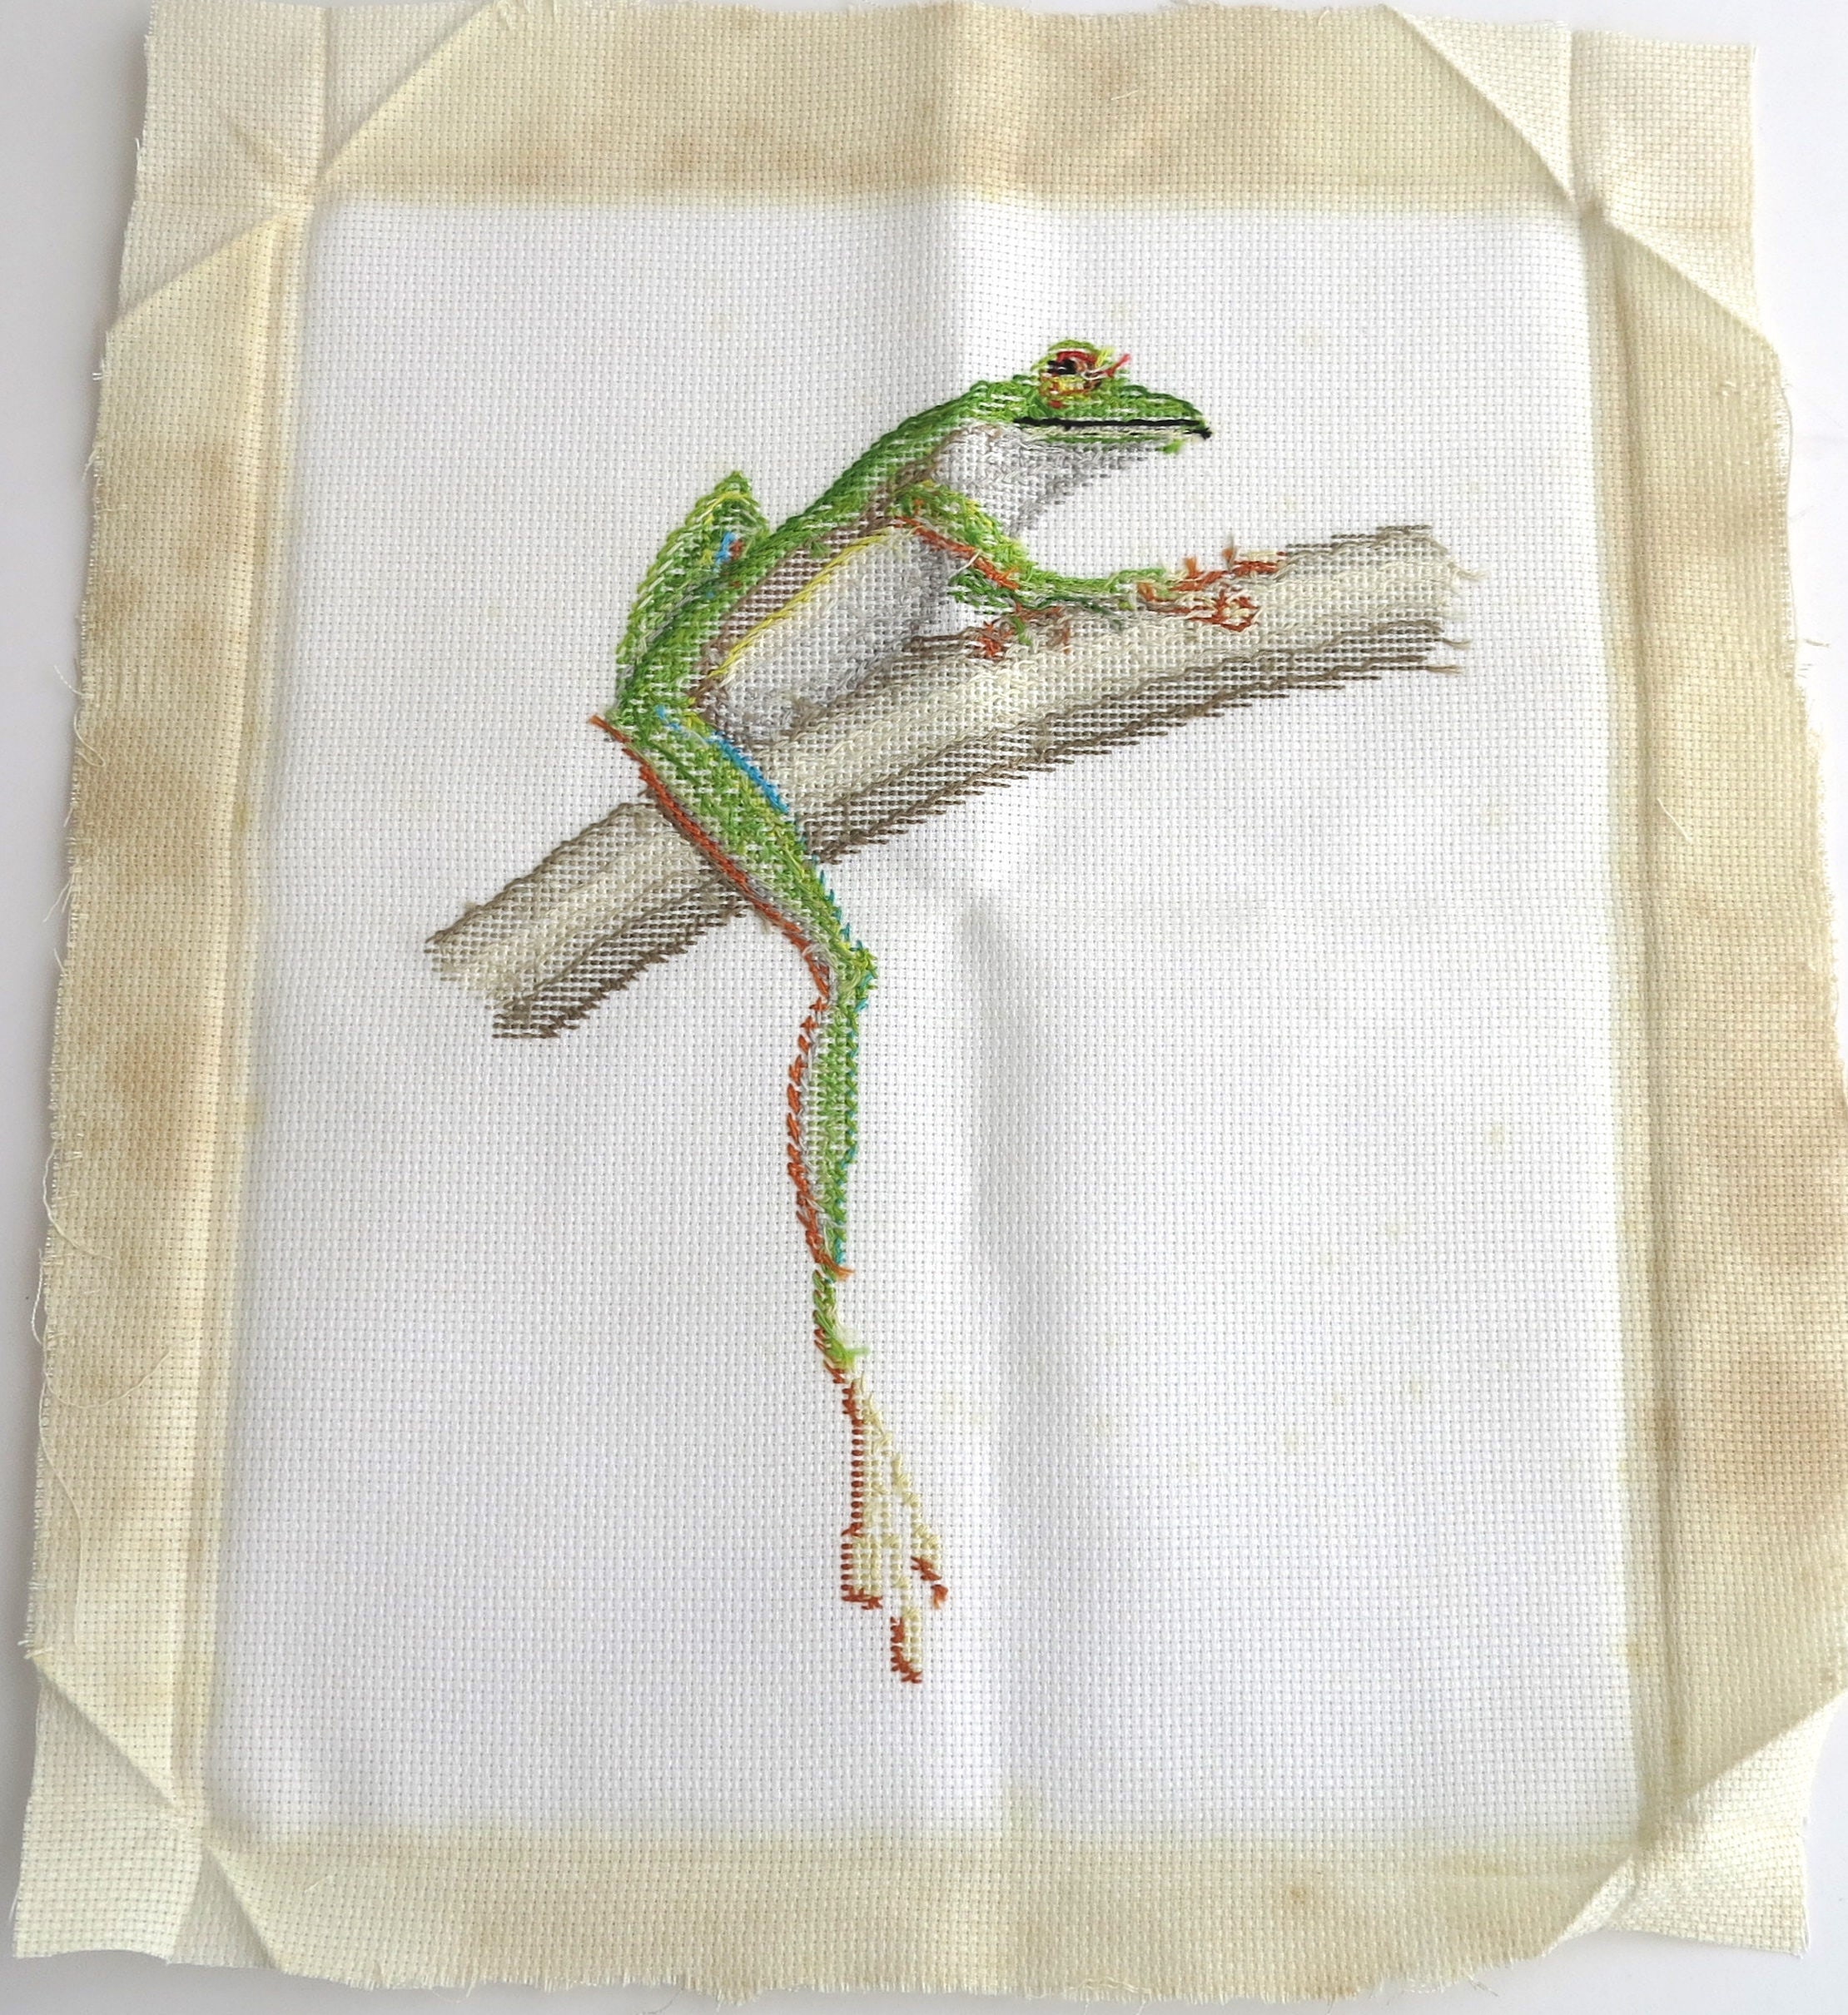 Download Embroidery of green frog sitting on a tree, continental ...